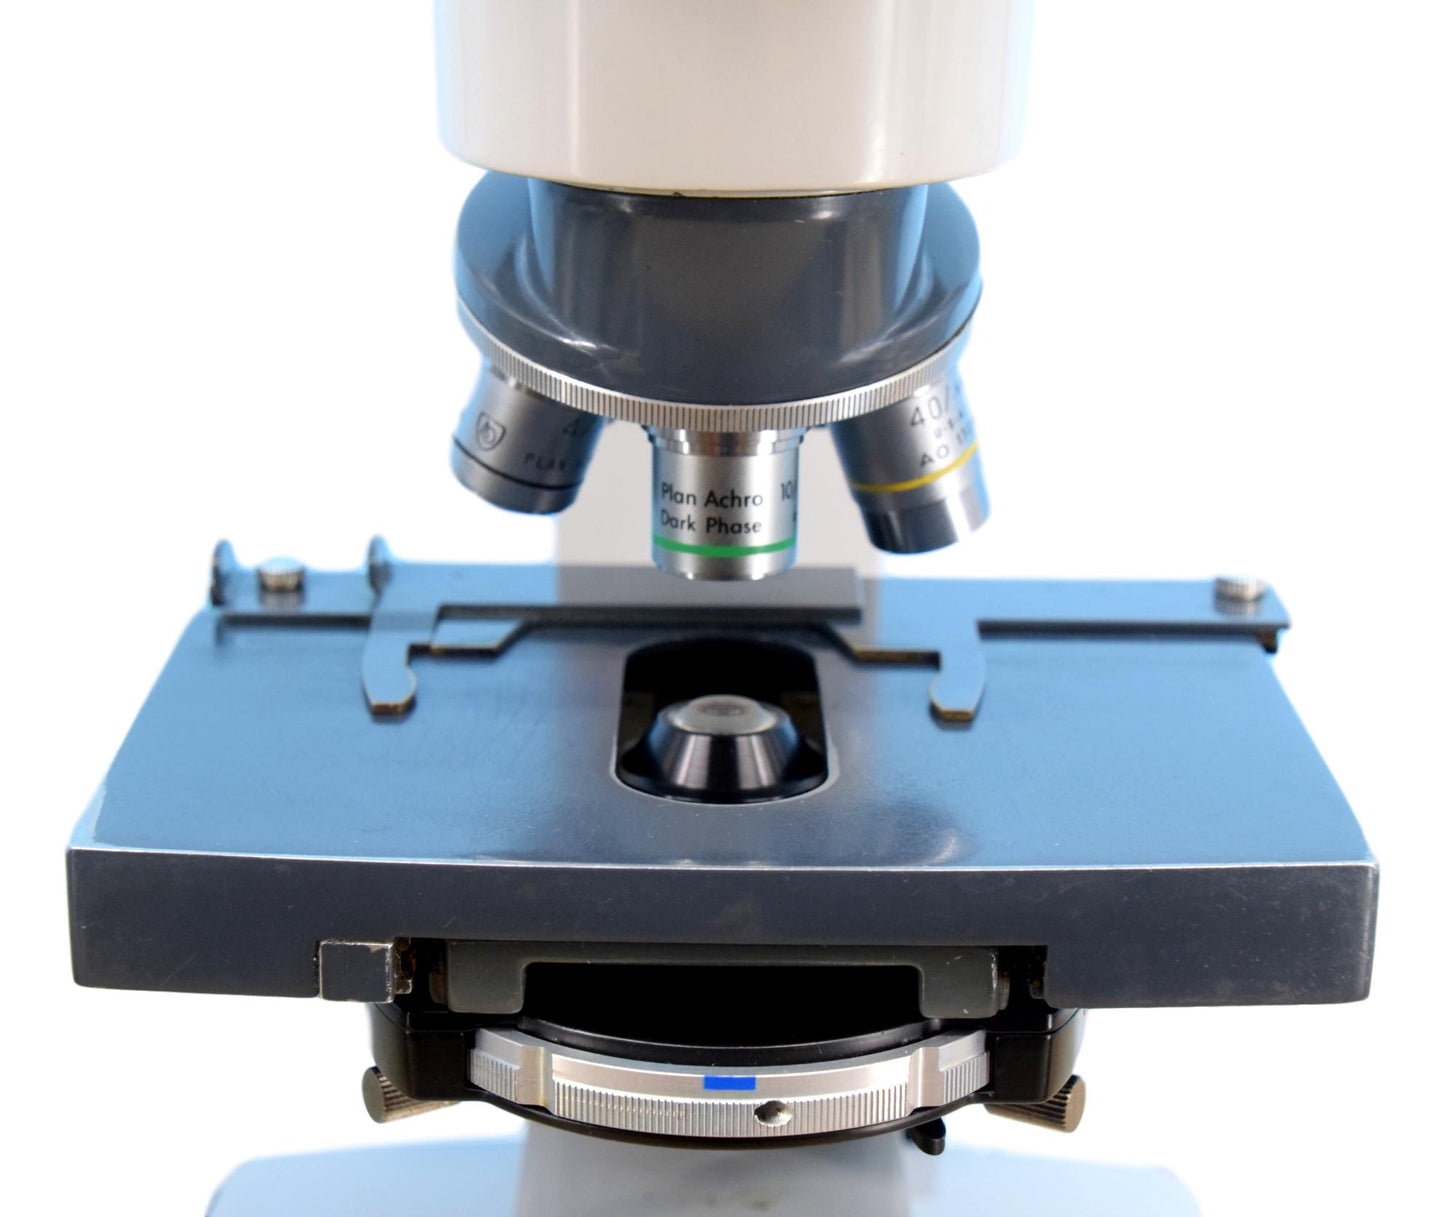 American Optical 110 Phase Contrast Microscope